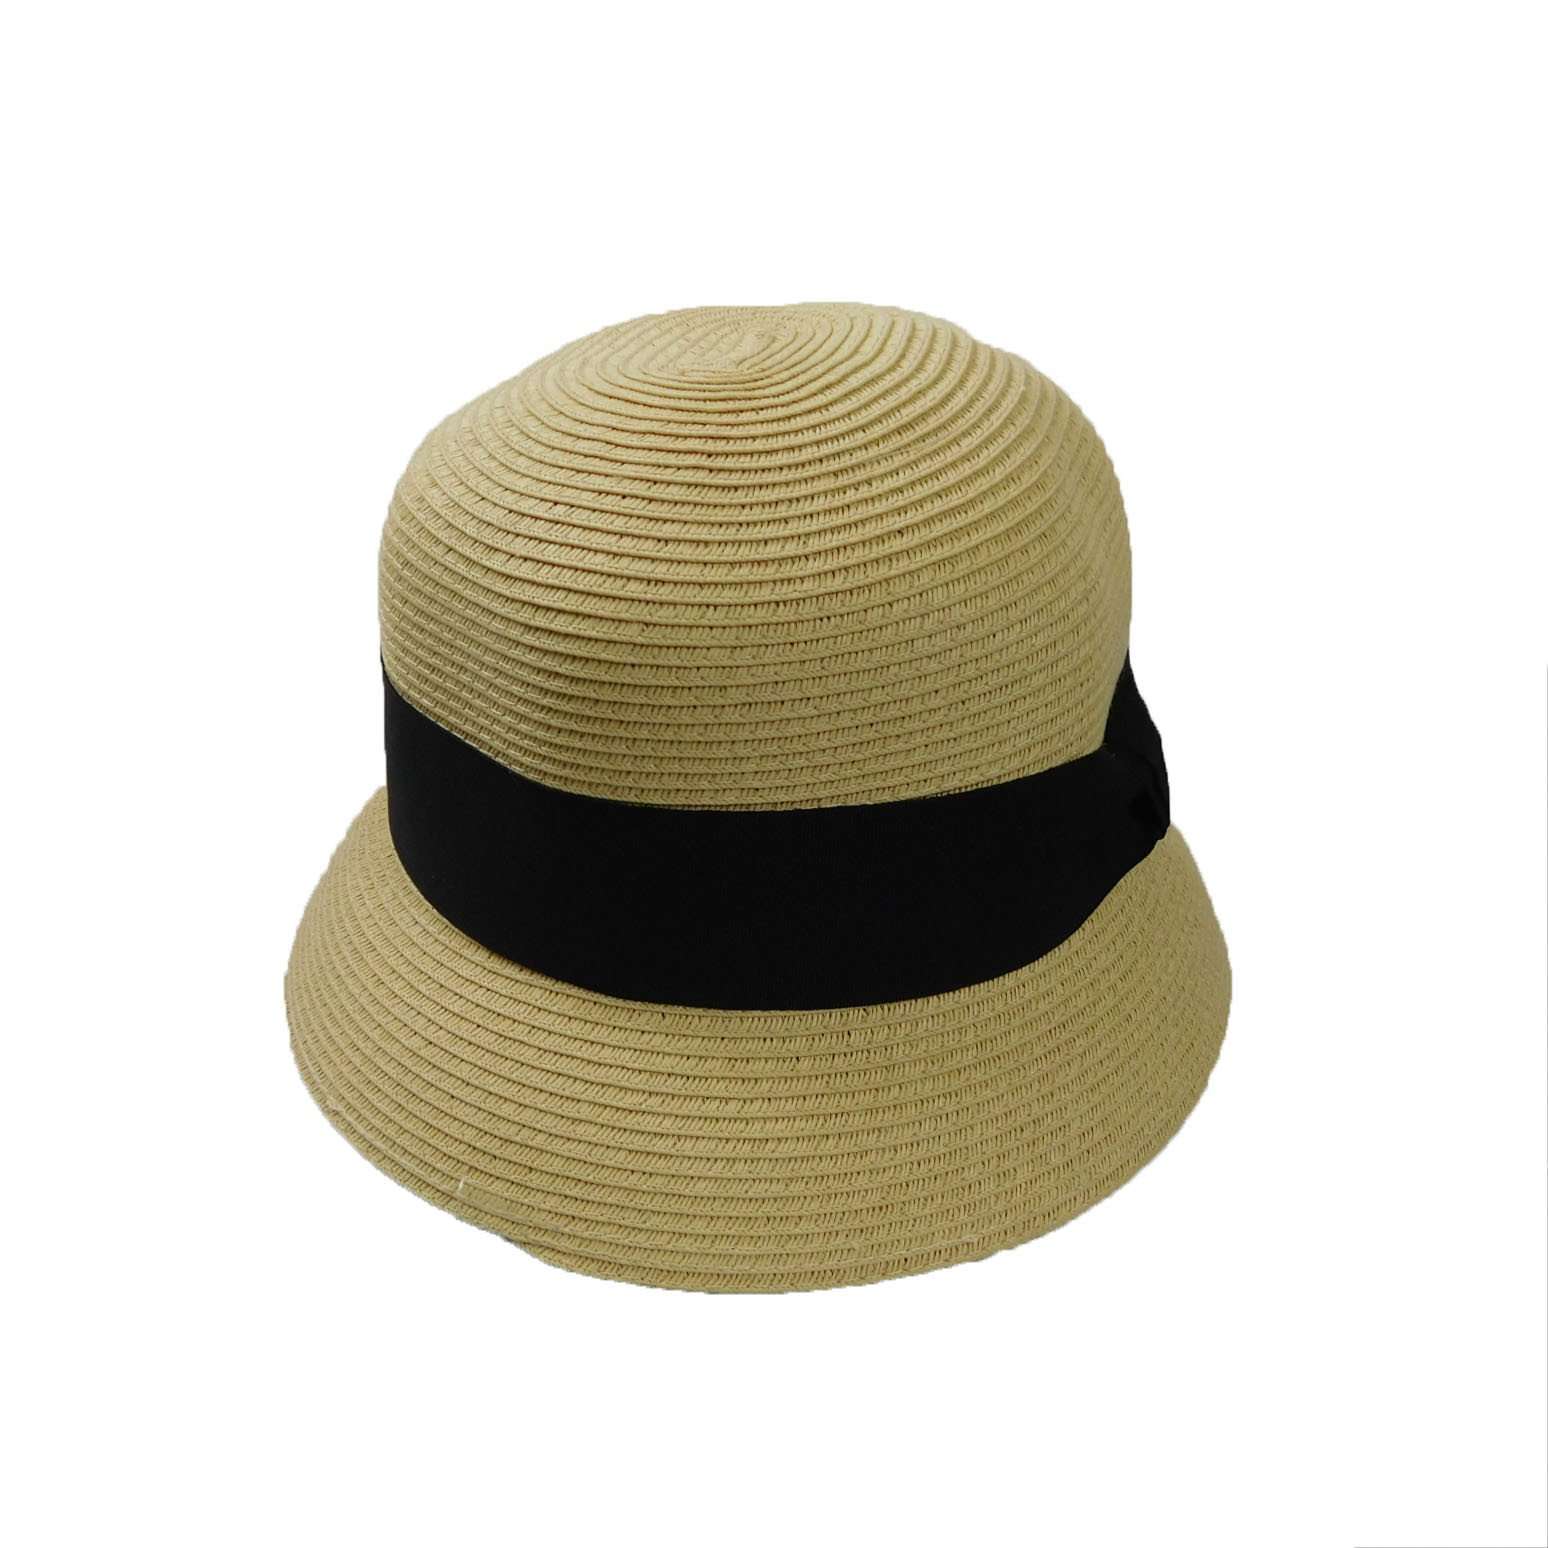 Summer Cloche with Wide Band Cloche Boardwalk Style Hats WSPS563BK Natural and Black  